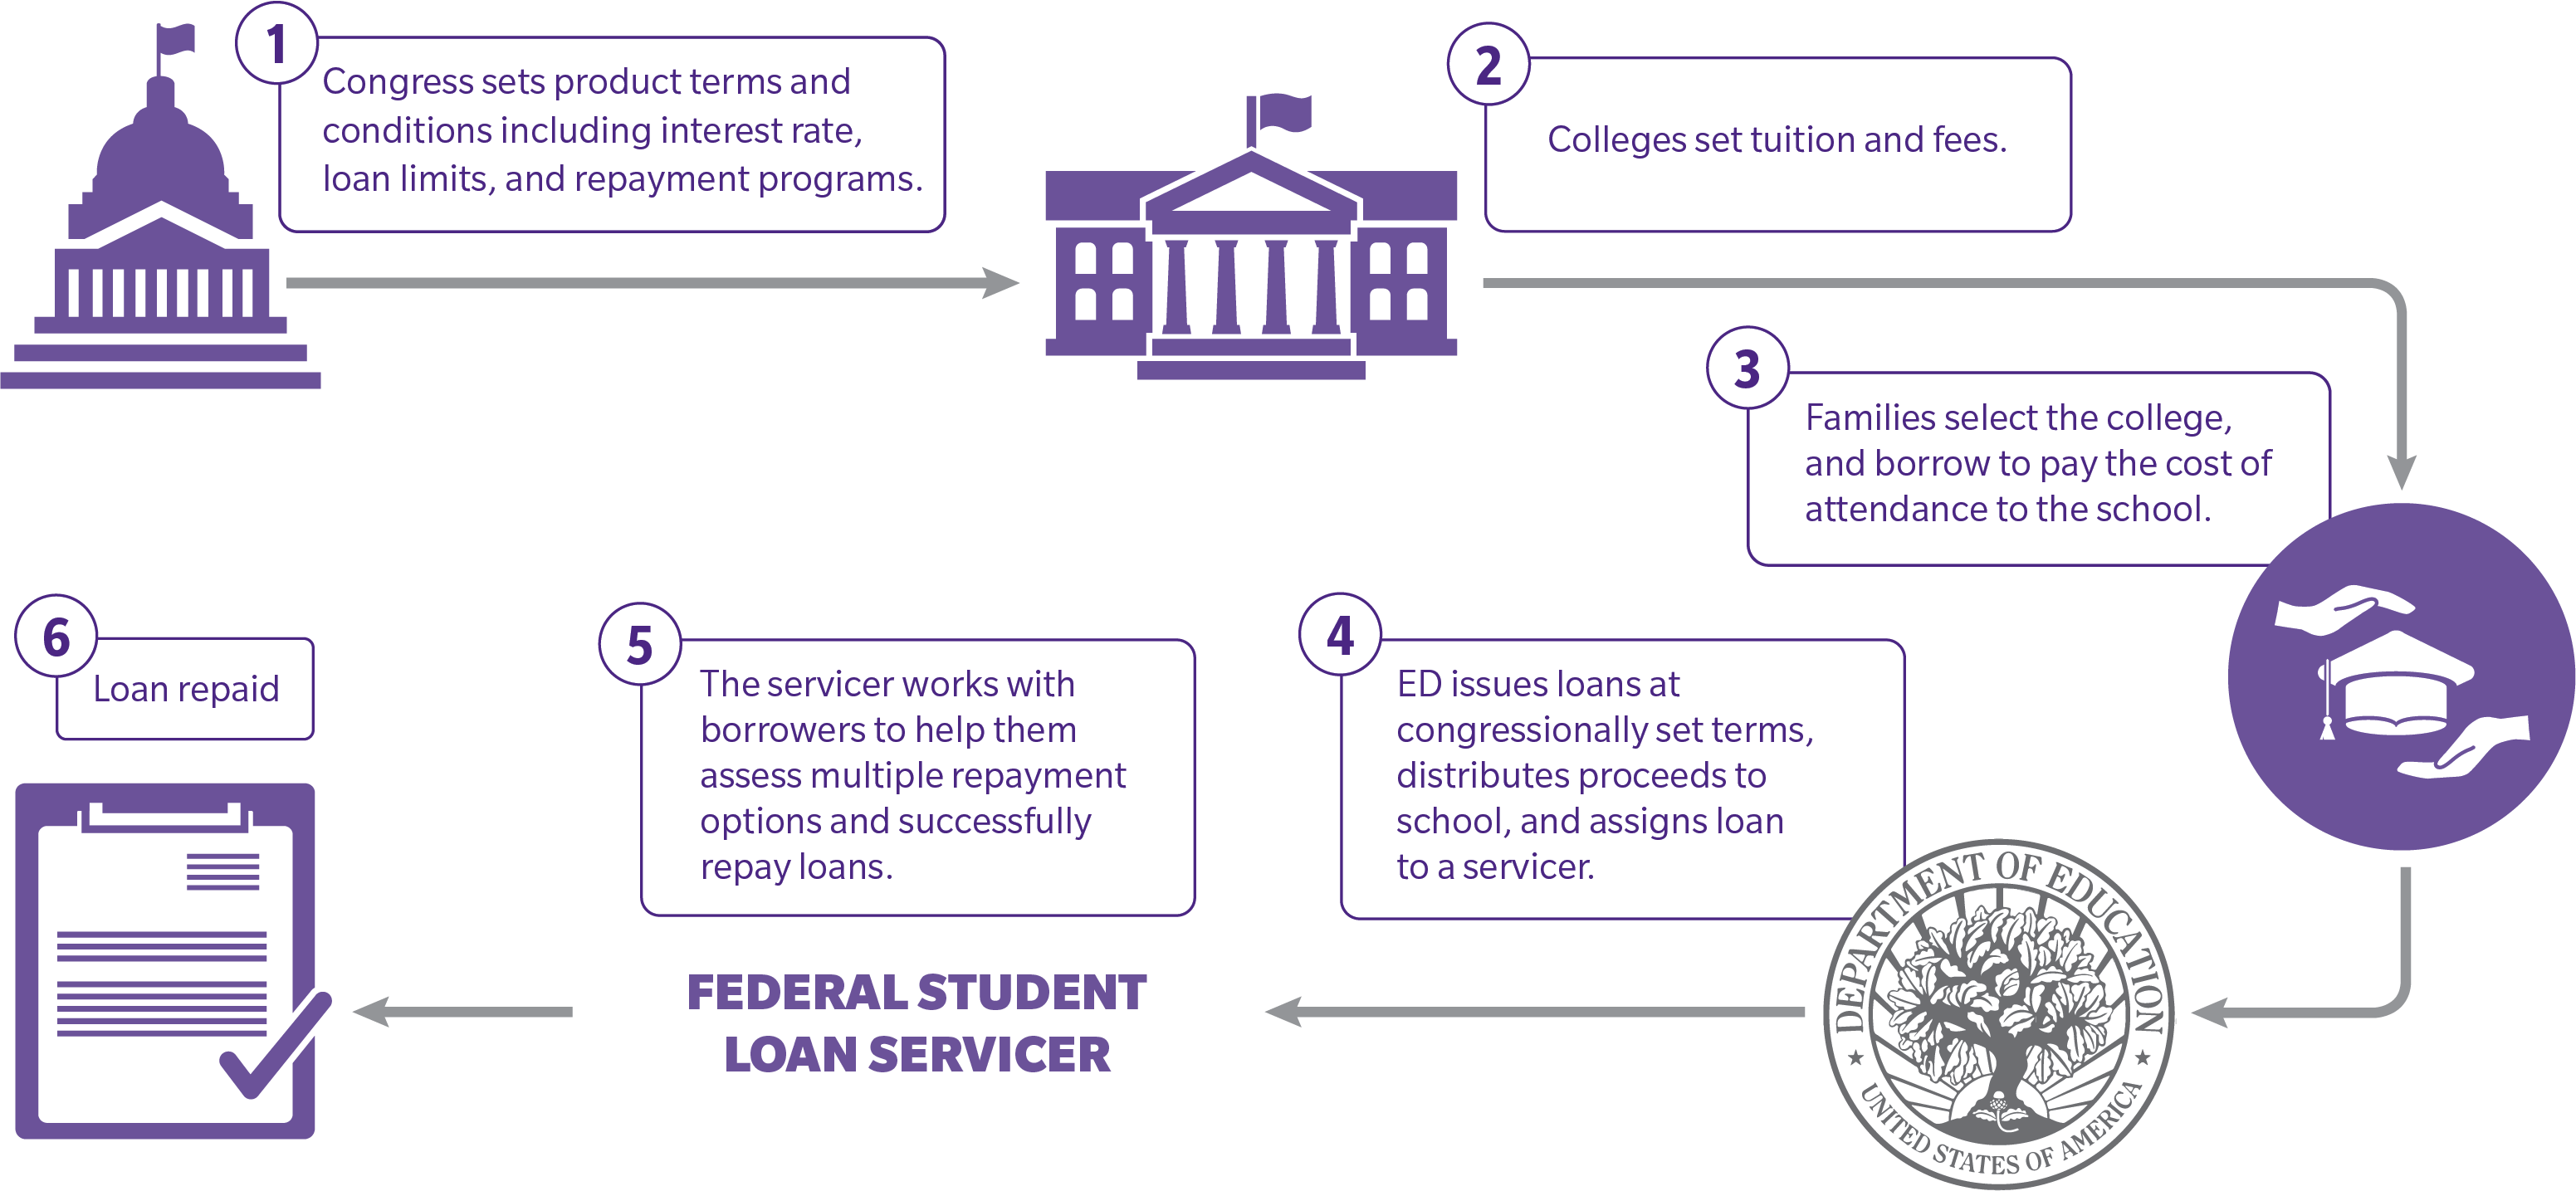 OUR ROLE AS A FEDERAL STUDENT LOAN SERVICER